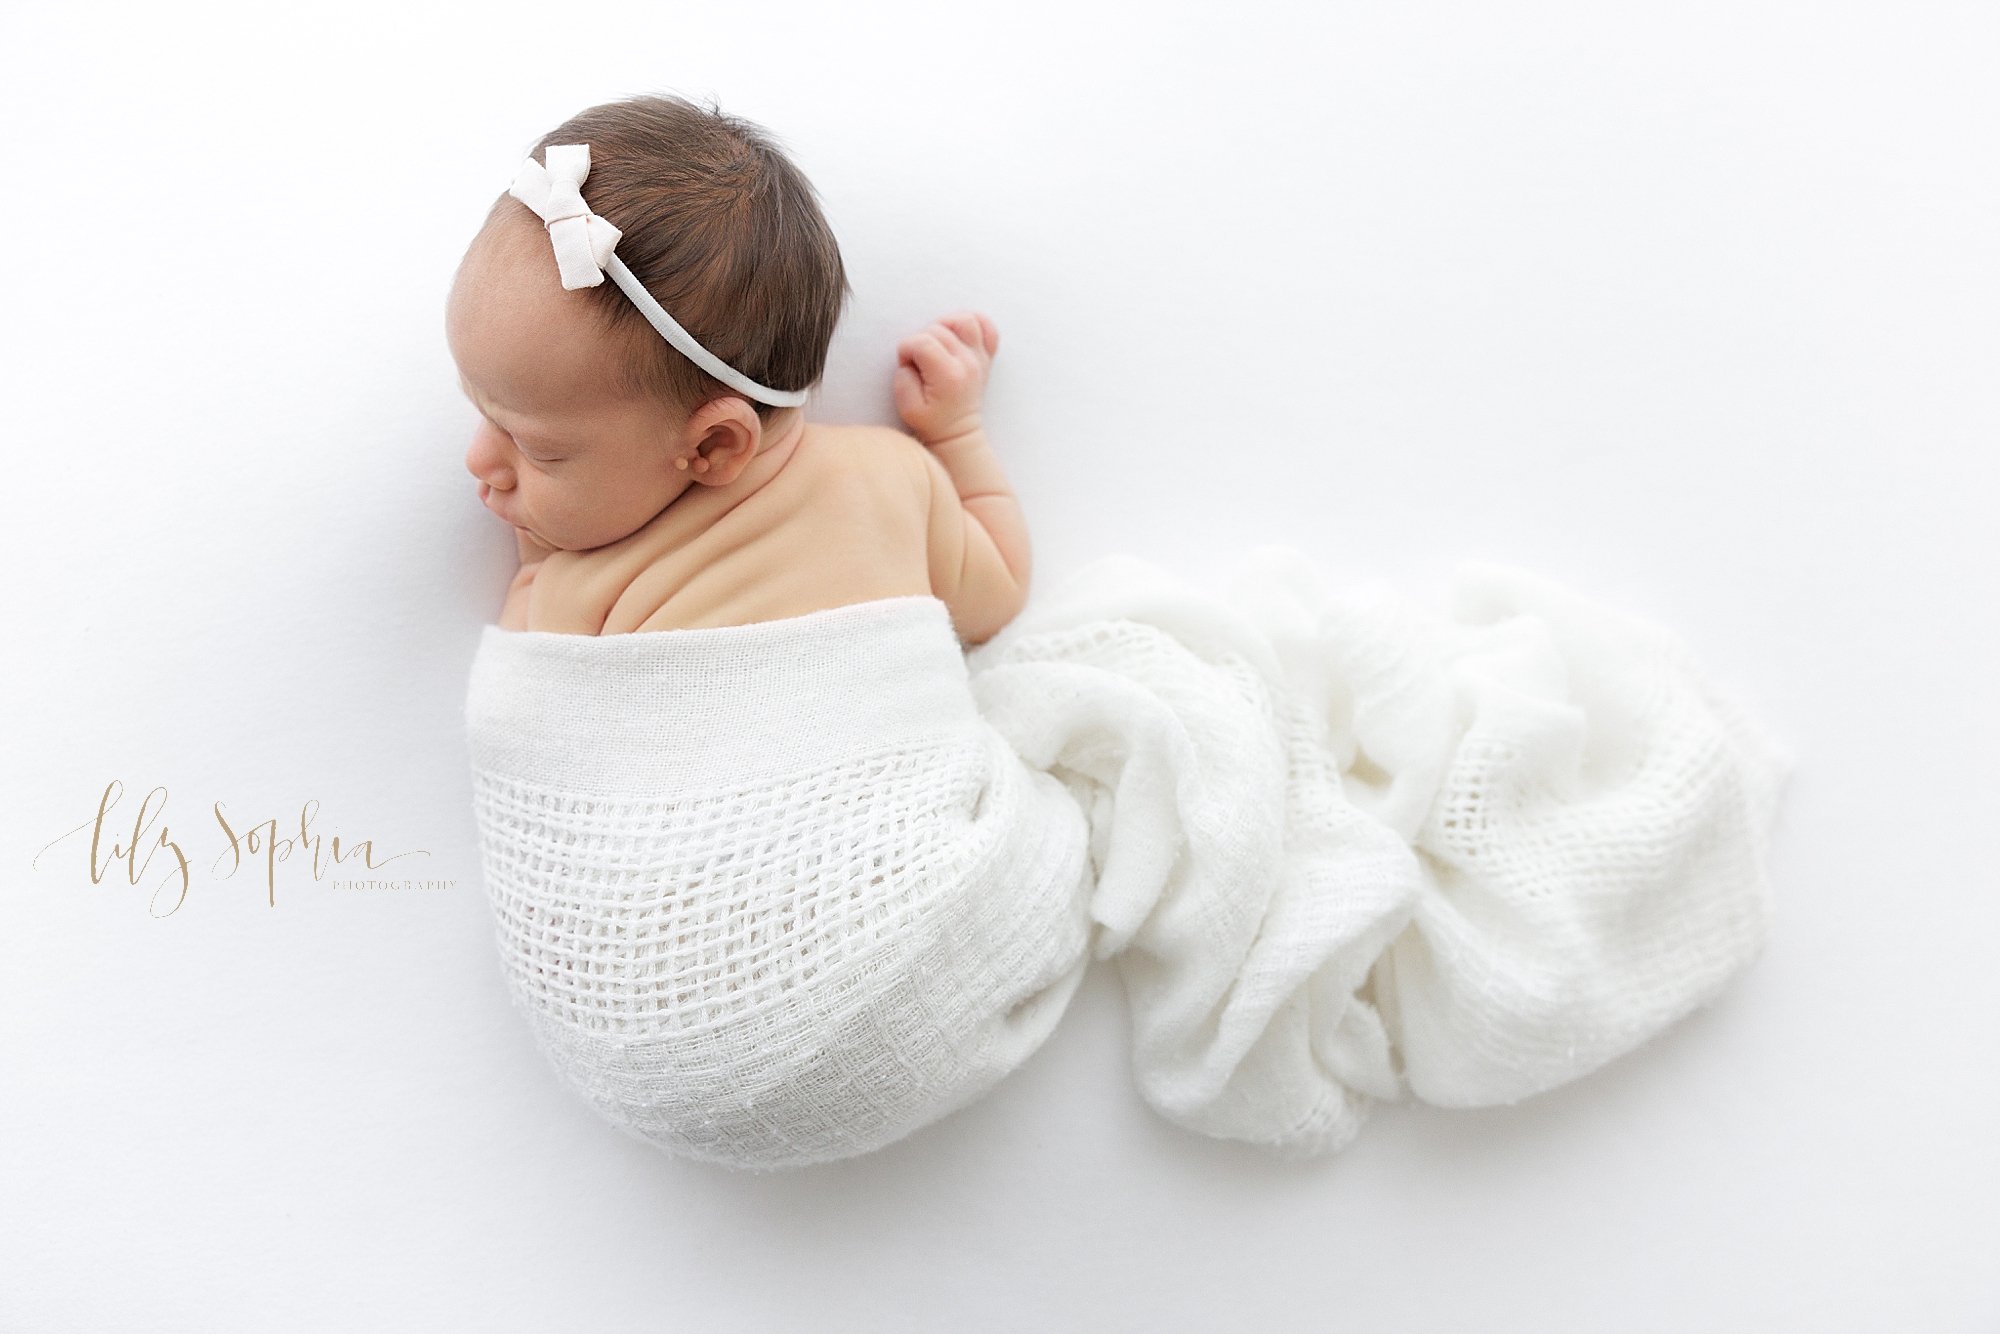  Newborn portrait of a newborn baby girl lying on her stomach as she turns her head over her left shoulder and the rolls on her back can be seen taken using natural light in a photography studio near Vinings in Atlanta. 